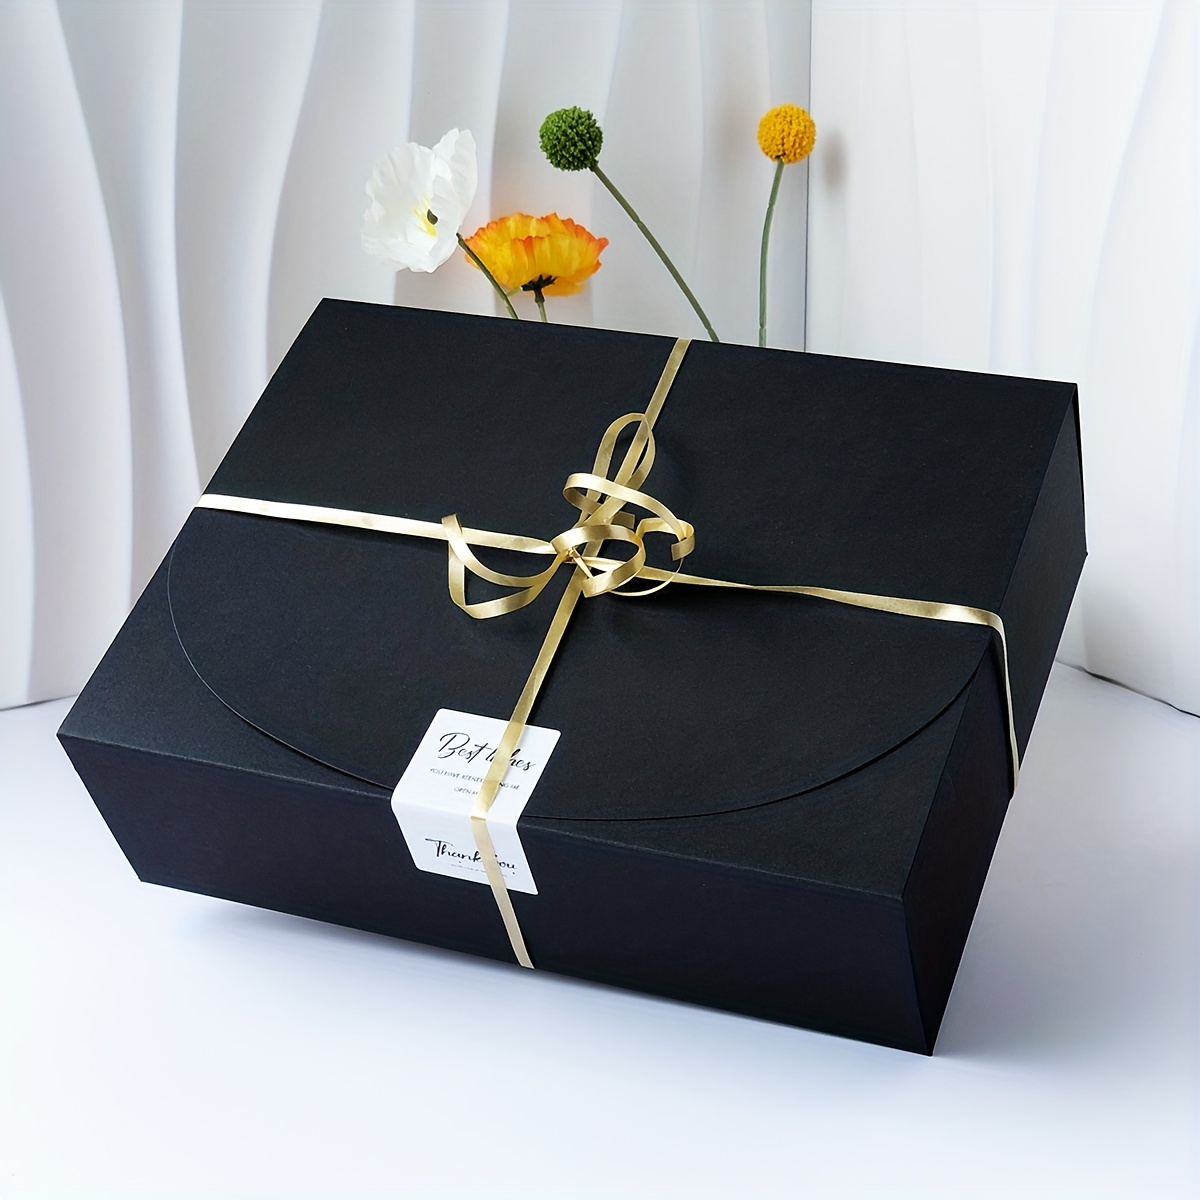 All-in-one Simple Luxury Gift Packaging Box Gift Storage Box